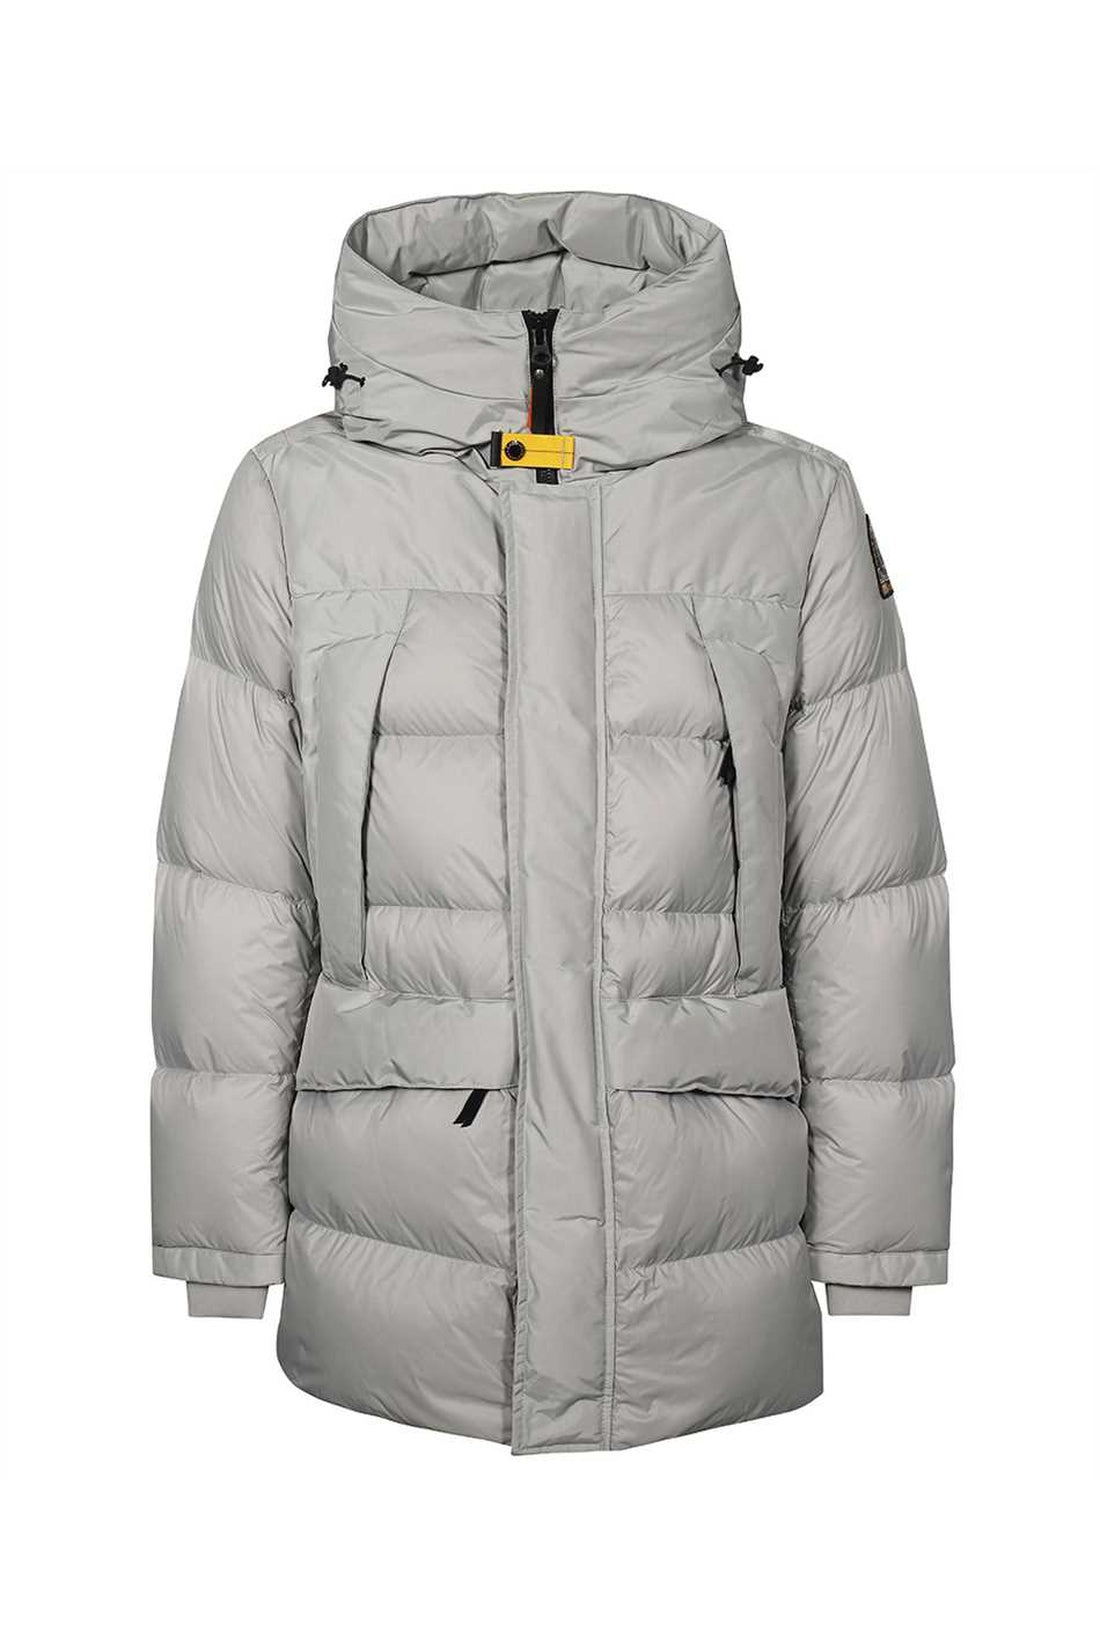 Parajumpers-OUTLET-SALE-Shedir hooded down jacket-ARCHIVIST